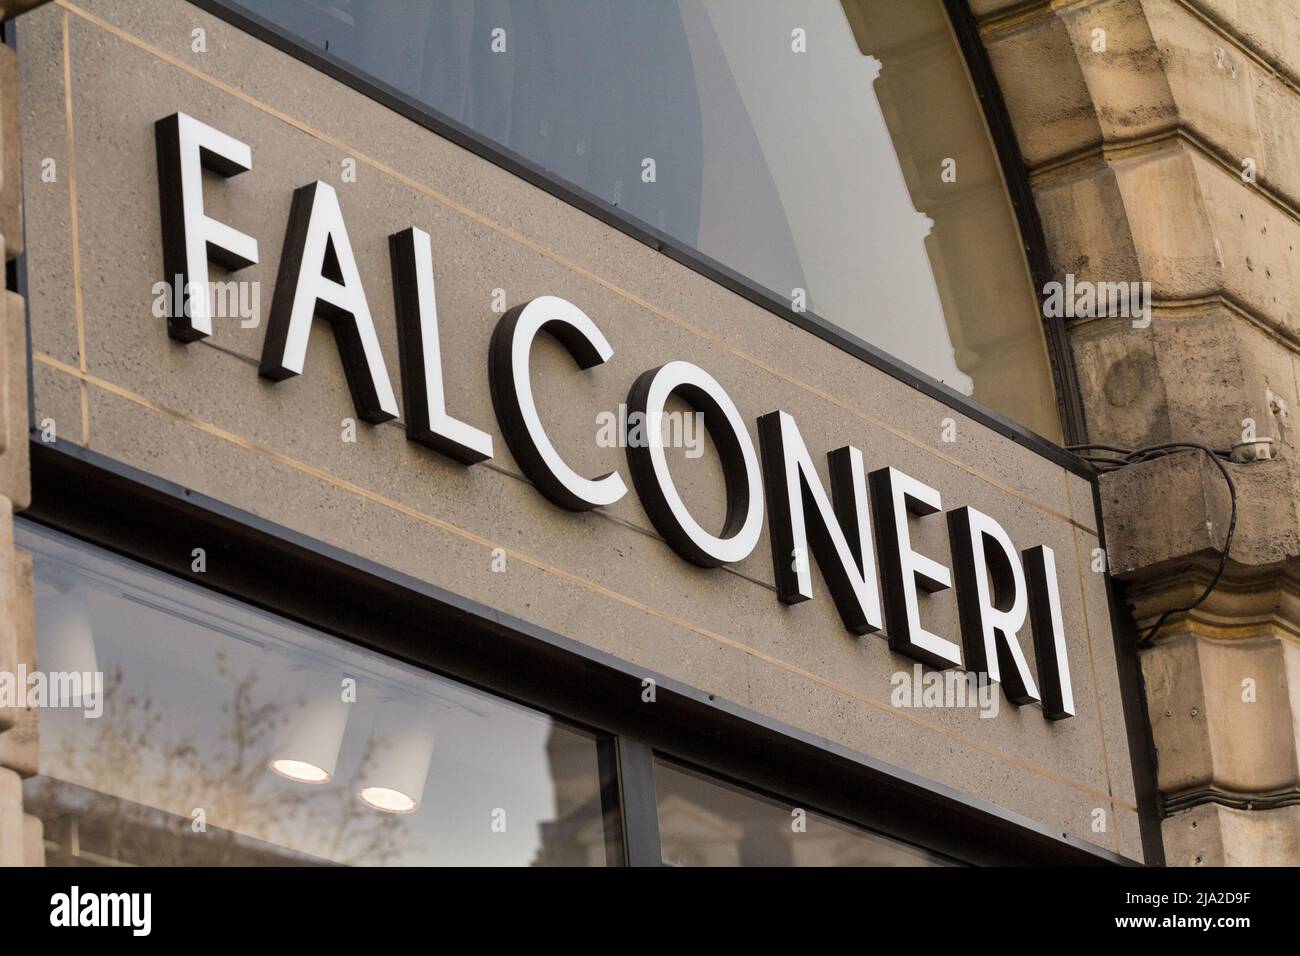 Picture of a sign with the logo of Falconeri taken on their main store for Bordeaux, France. Falconeri is an Italian luxury fashion house, specializin Stock Photo